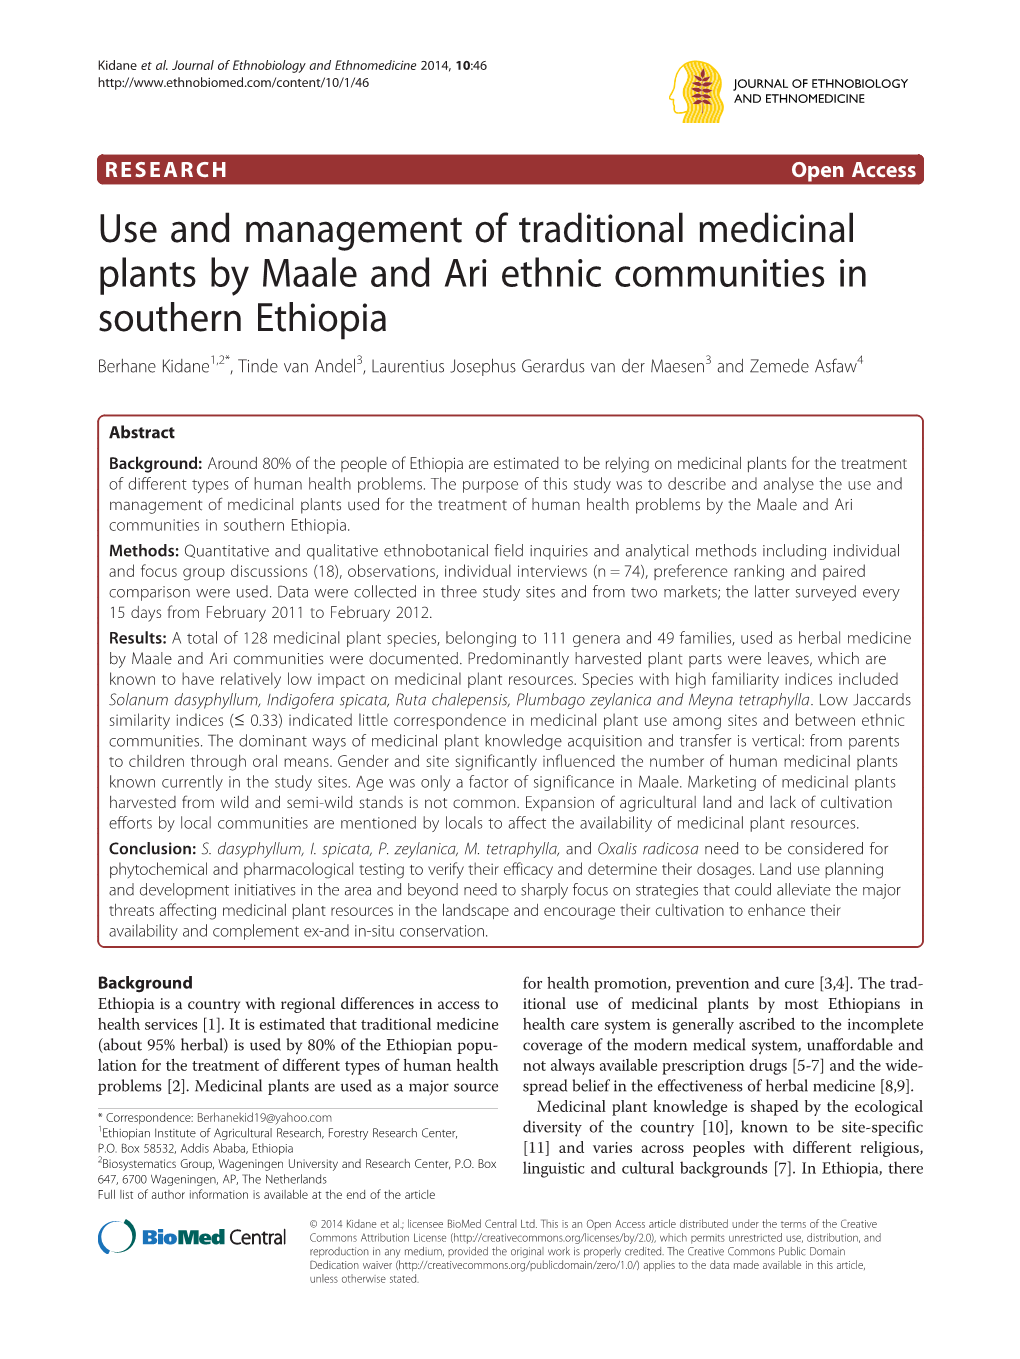 Use and Management of Traditional Medicinal Plants by Maale and Ari